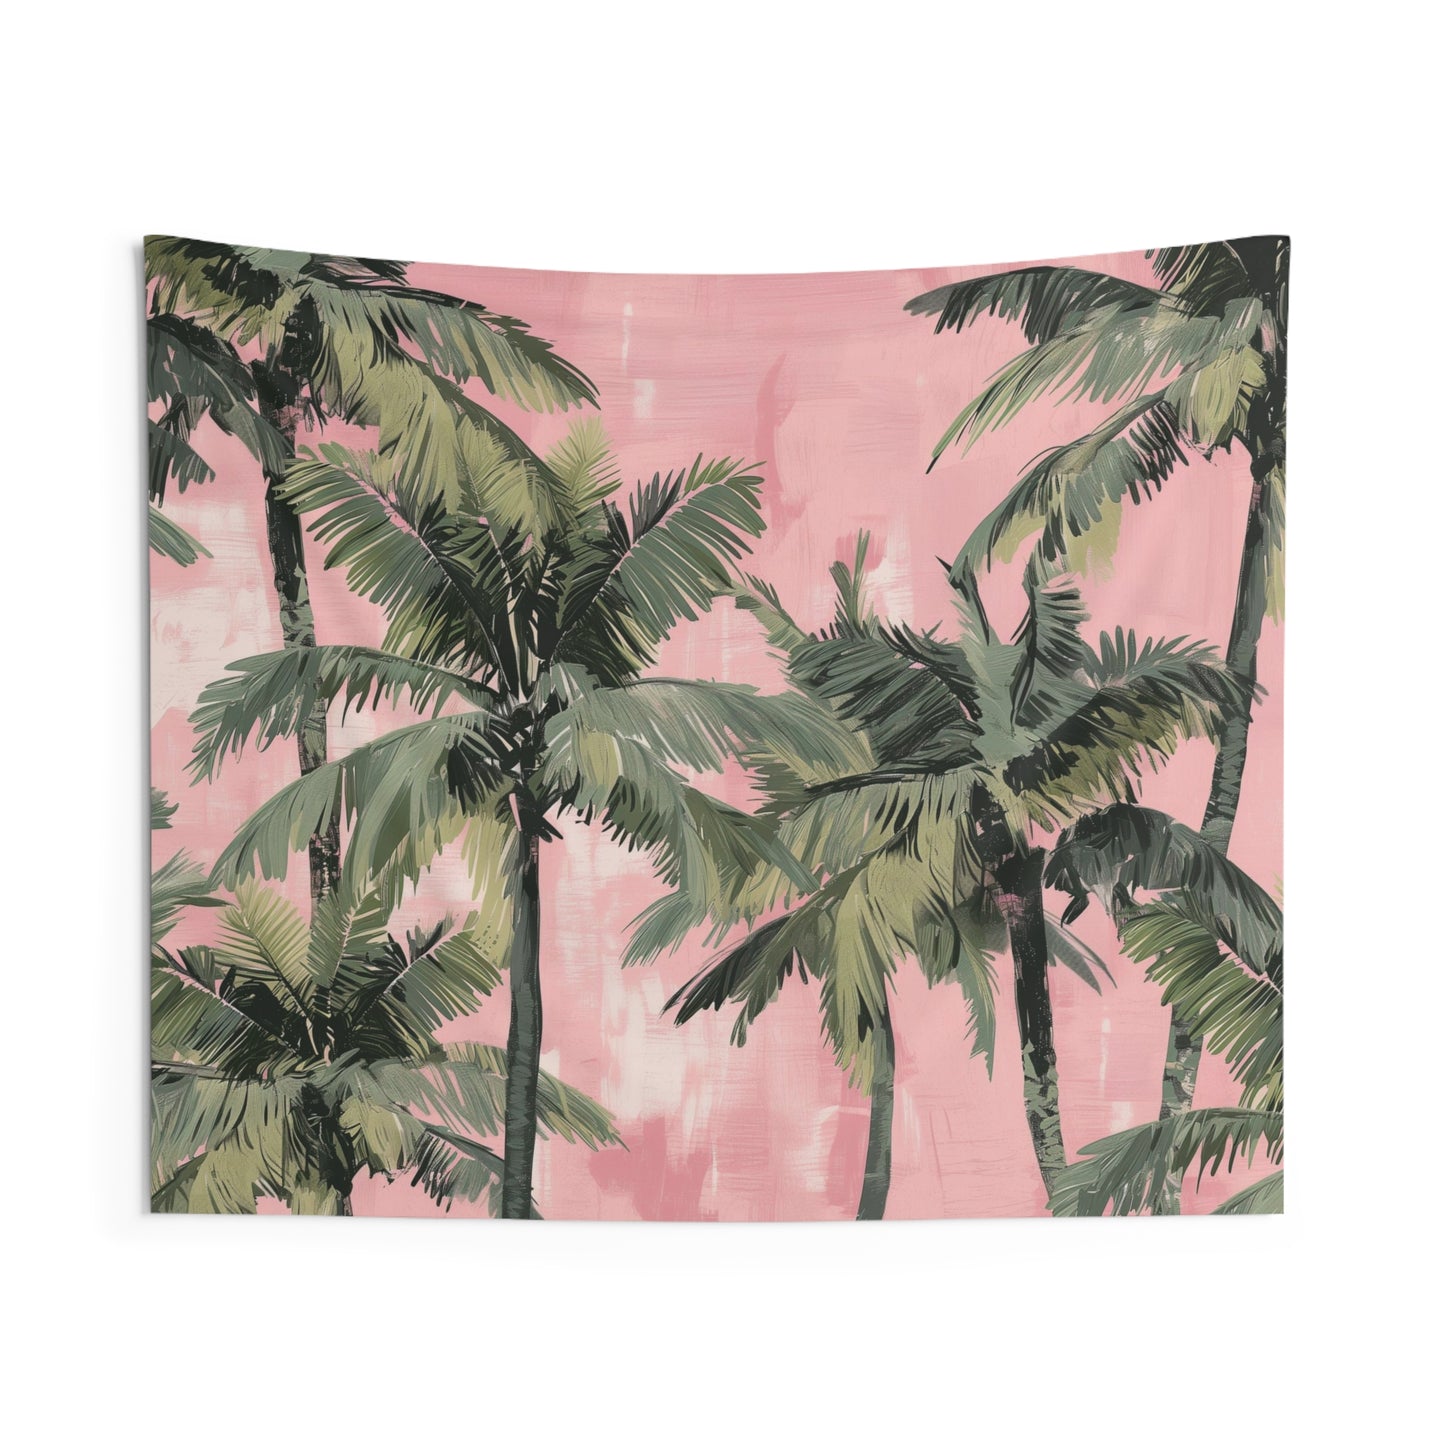 Palm Trees Tapestry, Green Pink Wall Art Hanging Cool Unique Landscape Aesthetic Large Small Decor Bedroom College Dorm Room